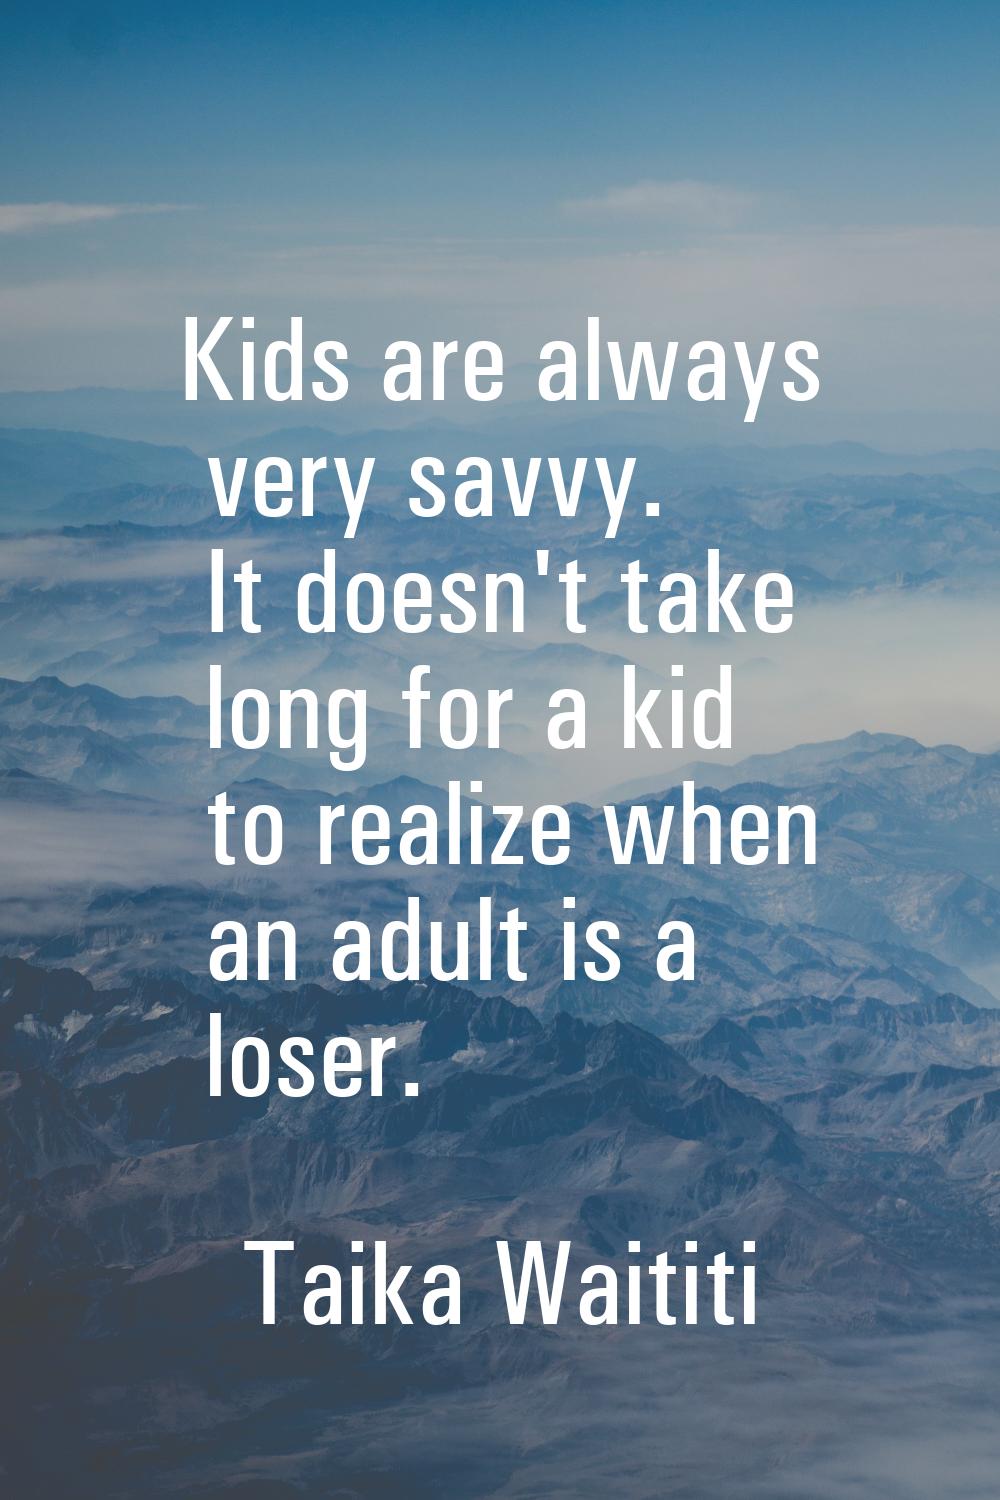 Kids are always very savvy. It doesn't take long for a kid to realize when an adult is a loser.